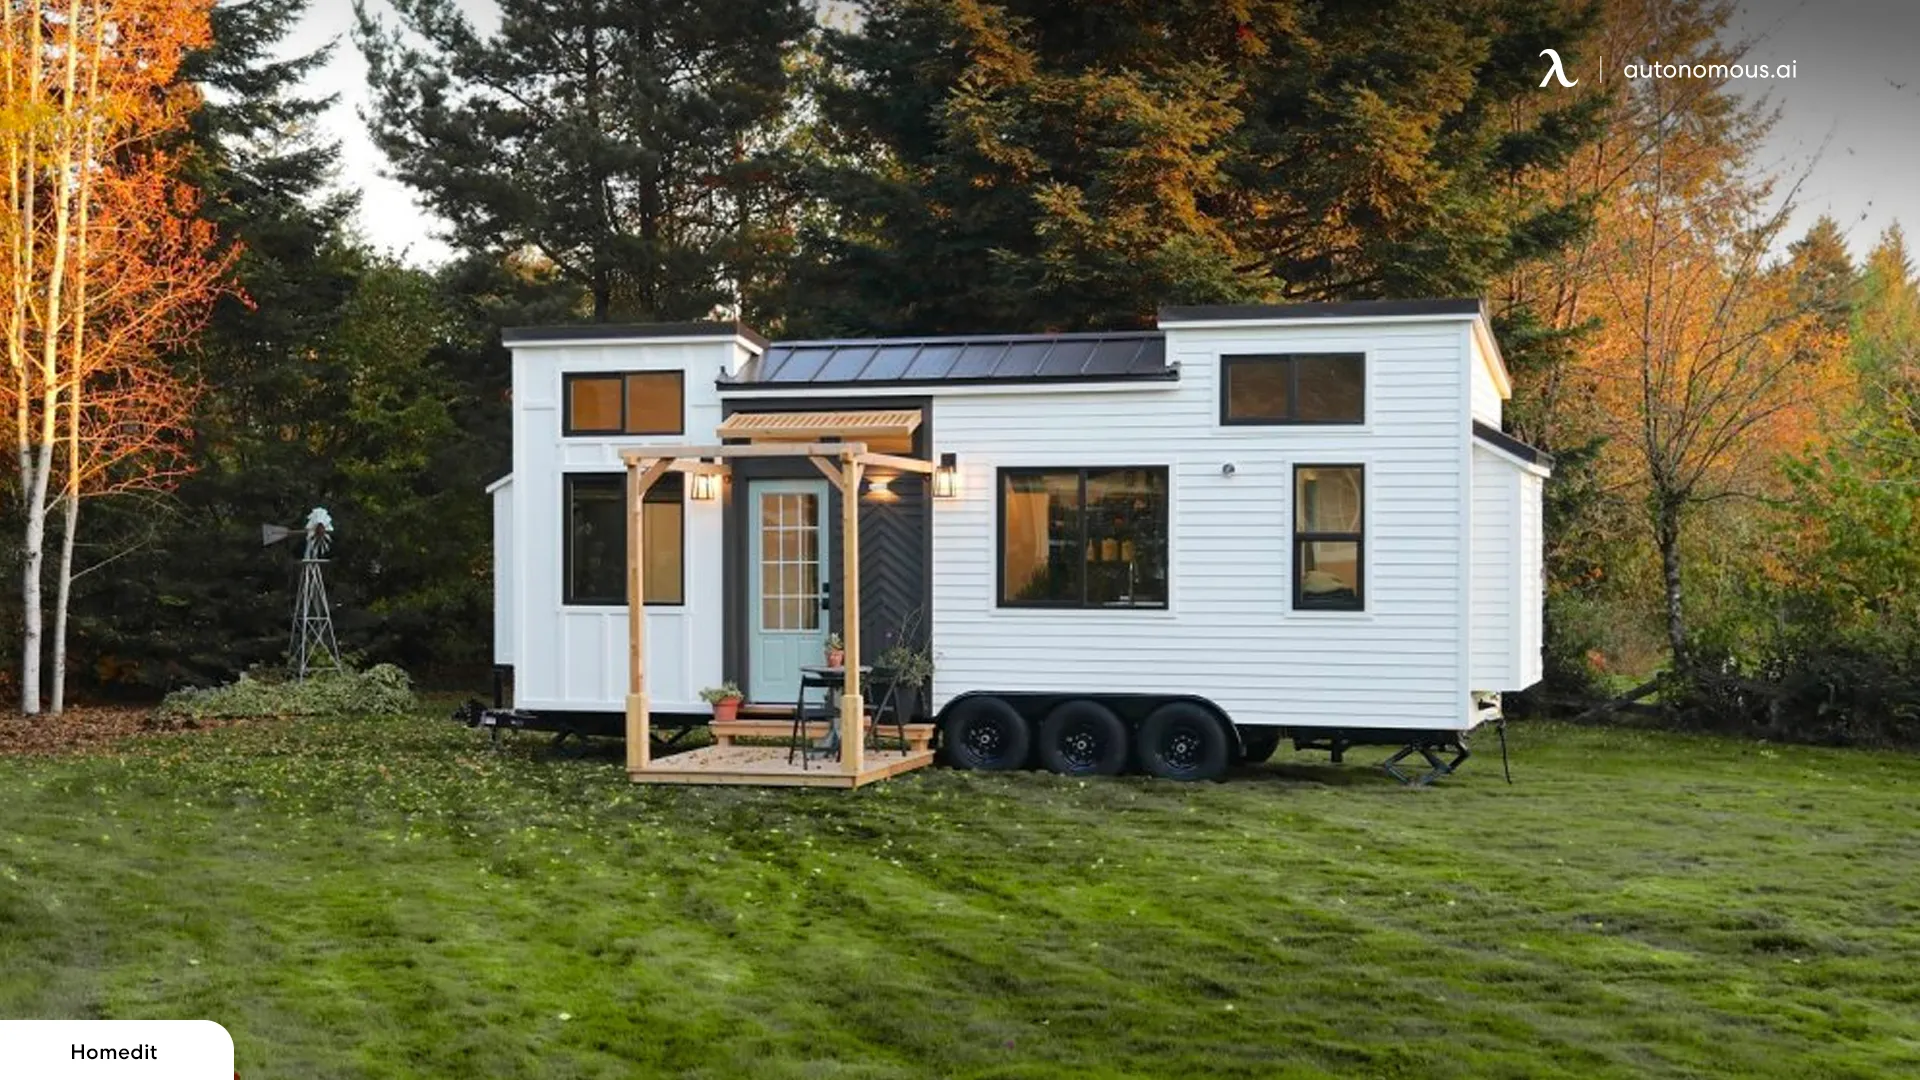 The Appeal of Tiny Homes in Dallas